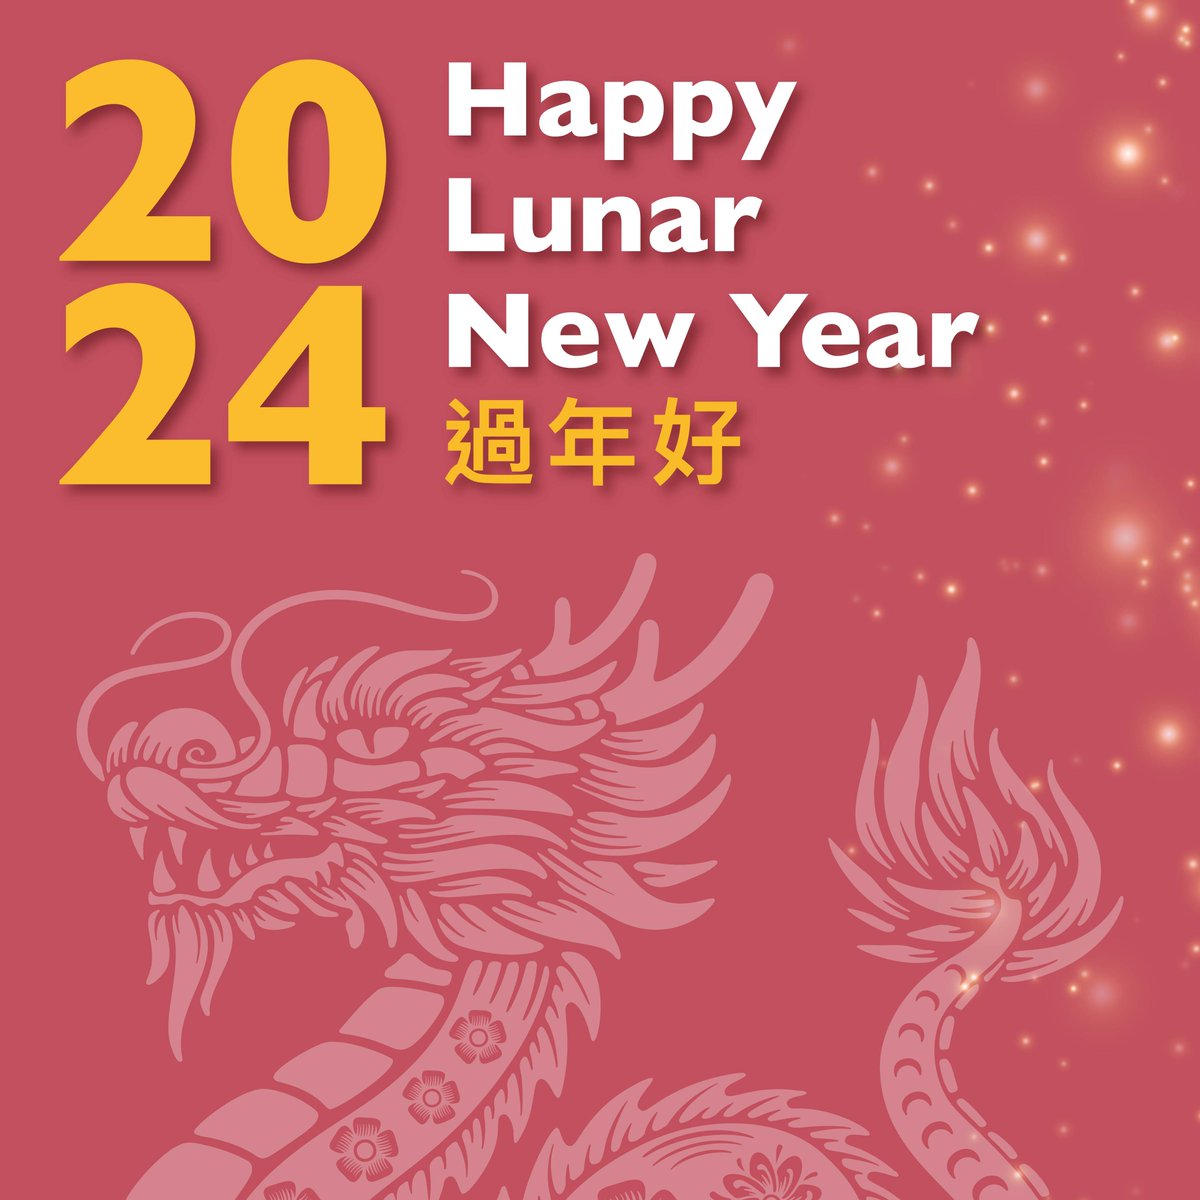 Happy Lunar New Year to all who celebrate! May this year bring good luck, justice, prosperity, and strength to you and your loved ones. #LunarNewYear